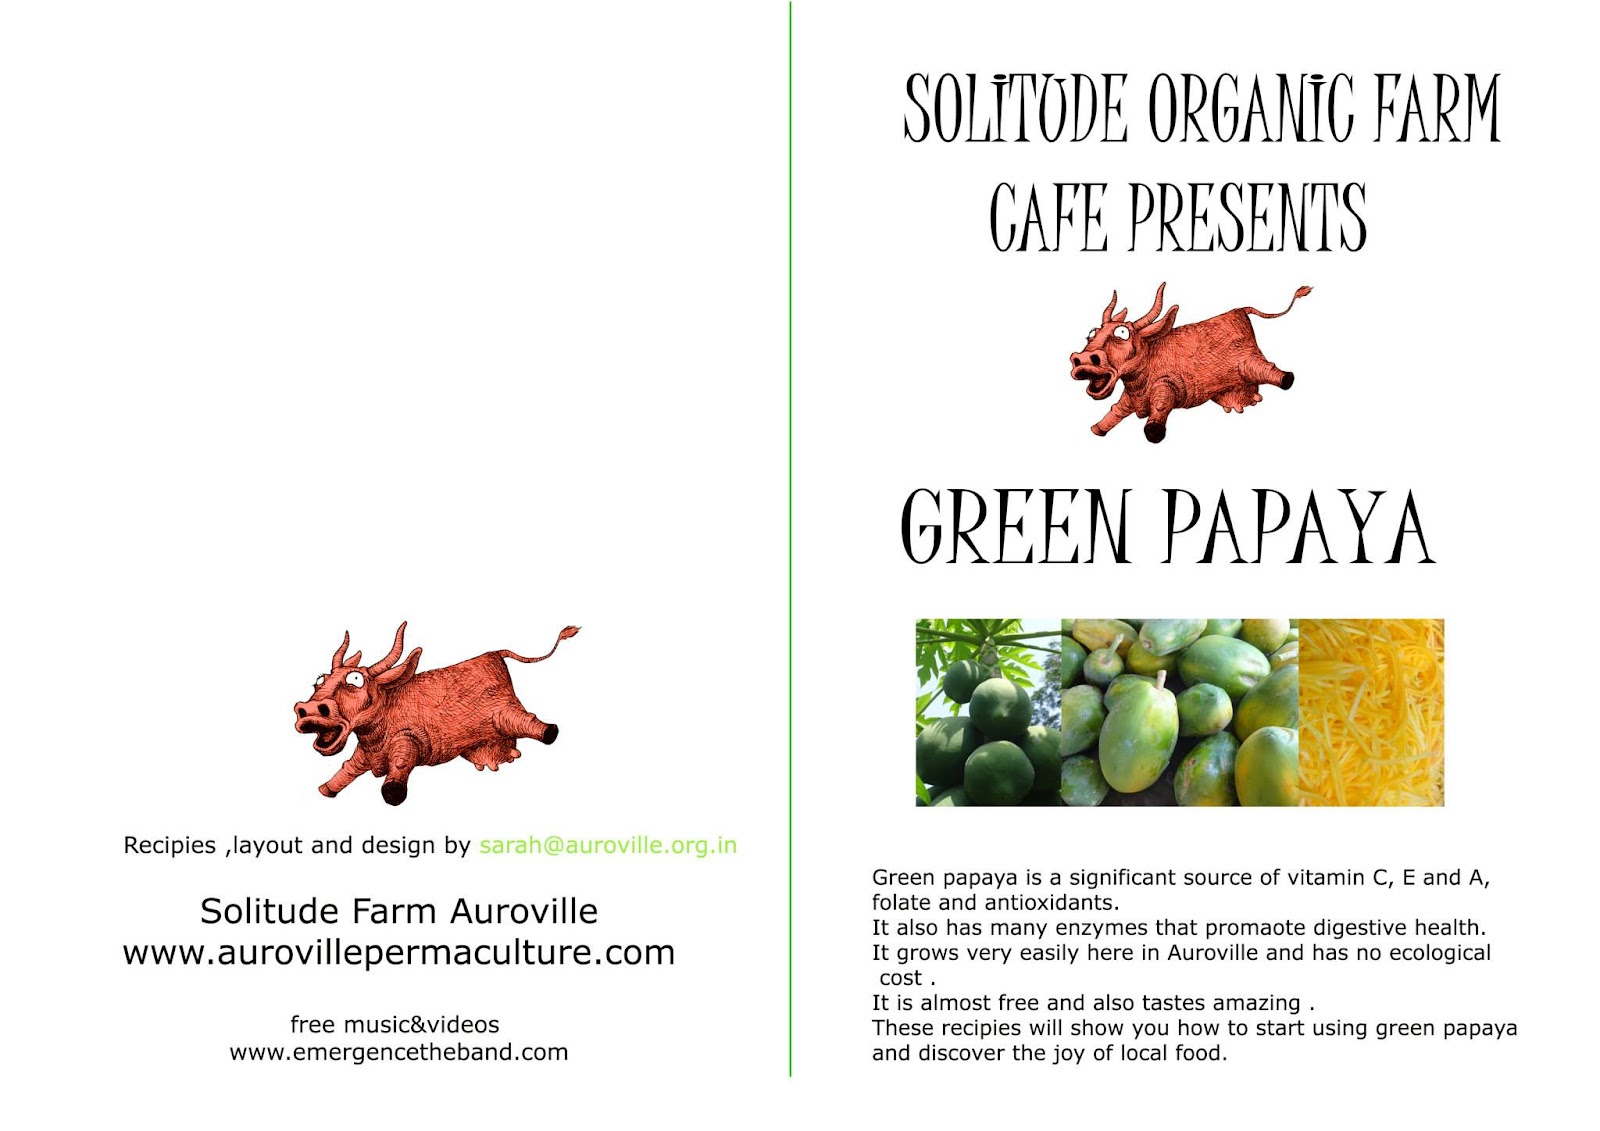 The Amazing Benefits of Green Papaya- 1Over the years, Solitude Farm Café has created many projects to help educate people on the benefits of local foods. One such effort was this collection of pamphlets made by Sarah Kundig (youtube.com/myfoodforest). These simple pamphlets give people who come to the café a chance to take away a cooking idea of something they have eaten on the thali.